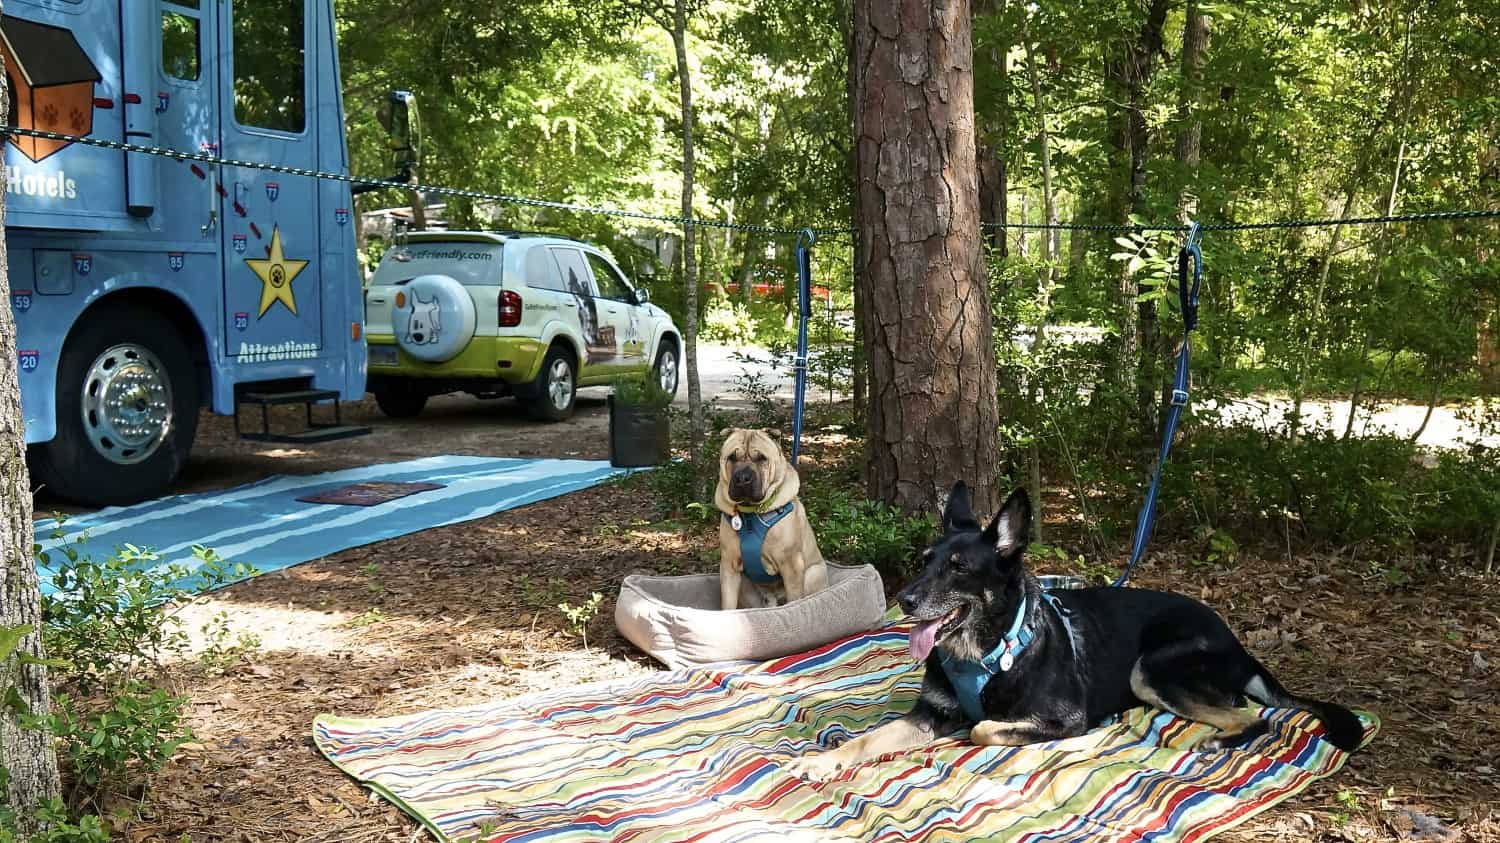  Ty the Shar-pei and Buster the German Shepherd relaxing in a campground on their zip line